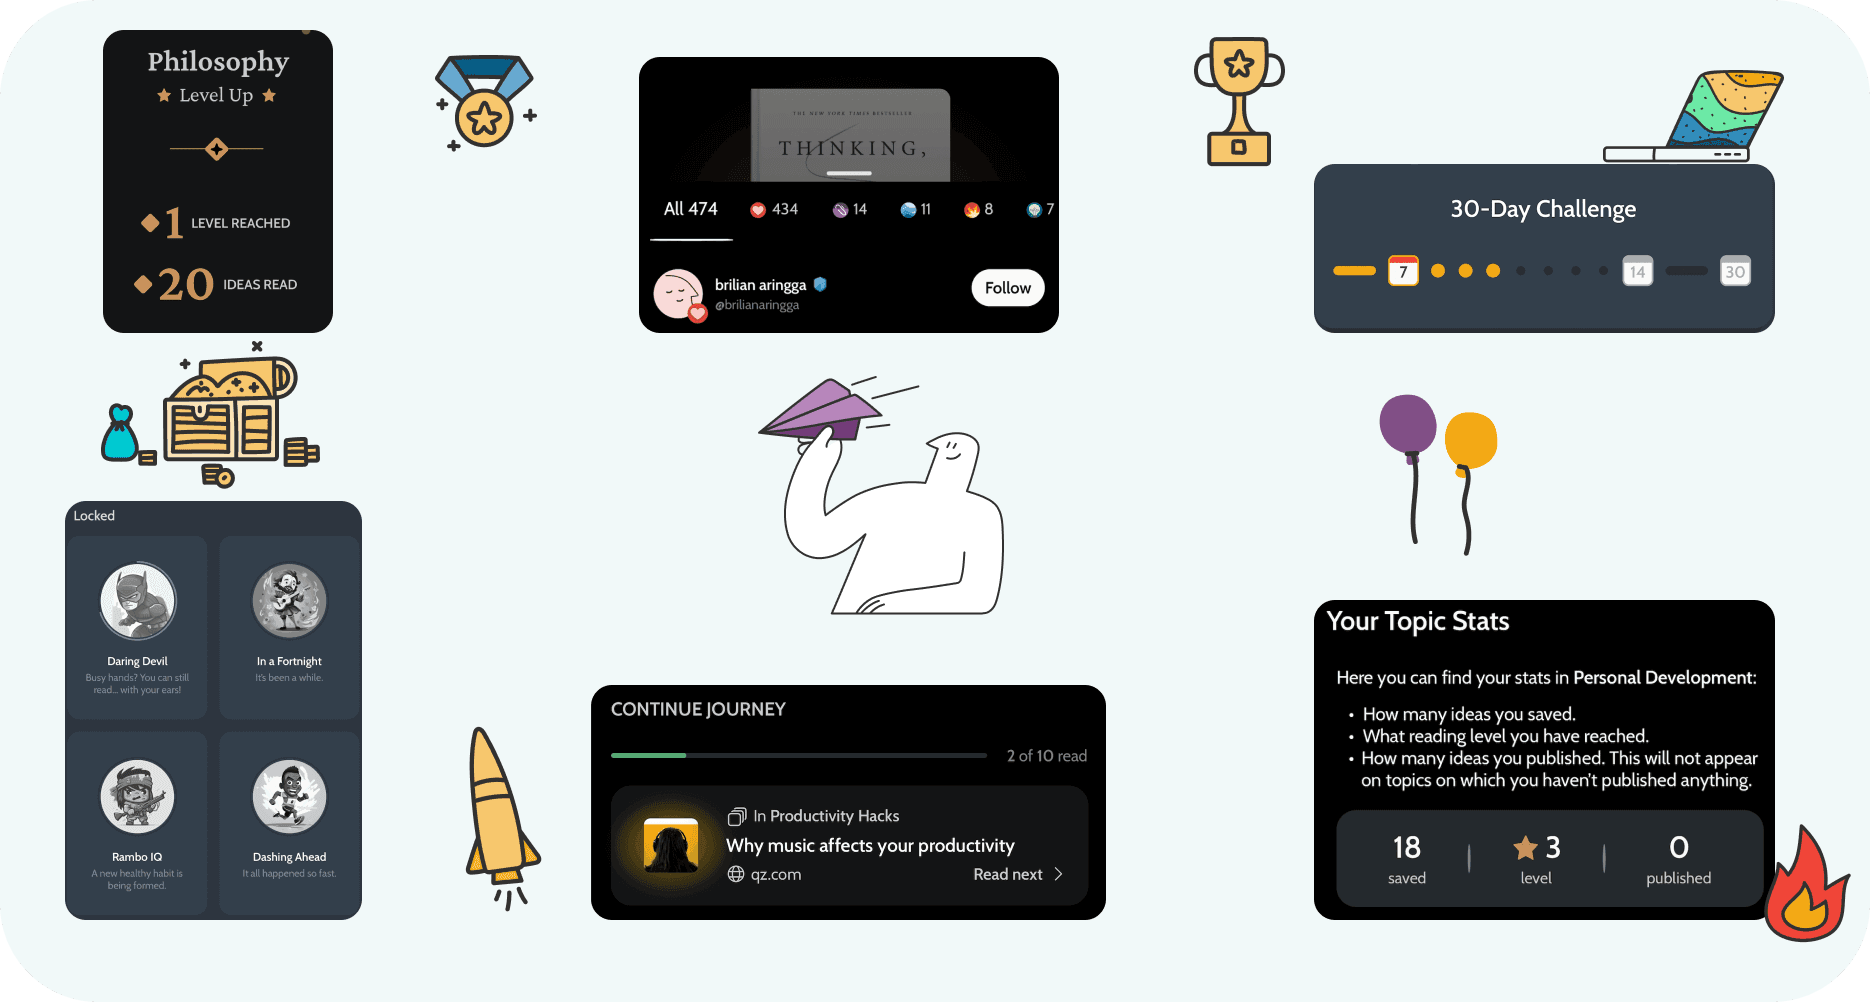 Example of different gamification elements found on Deepstash